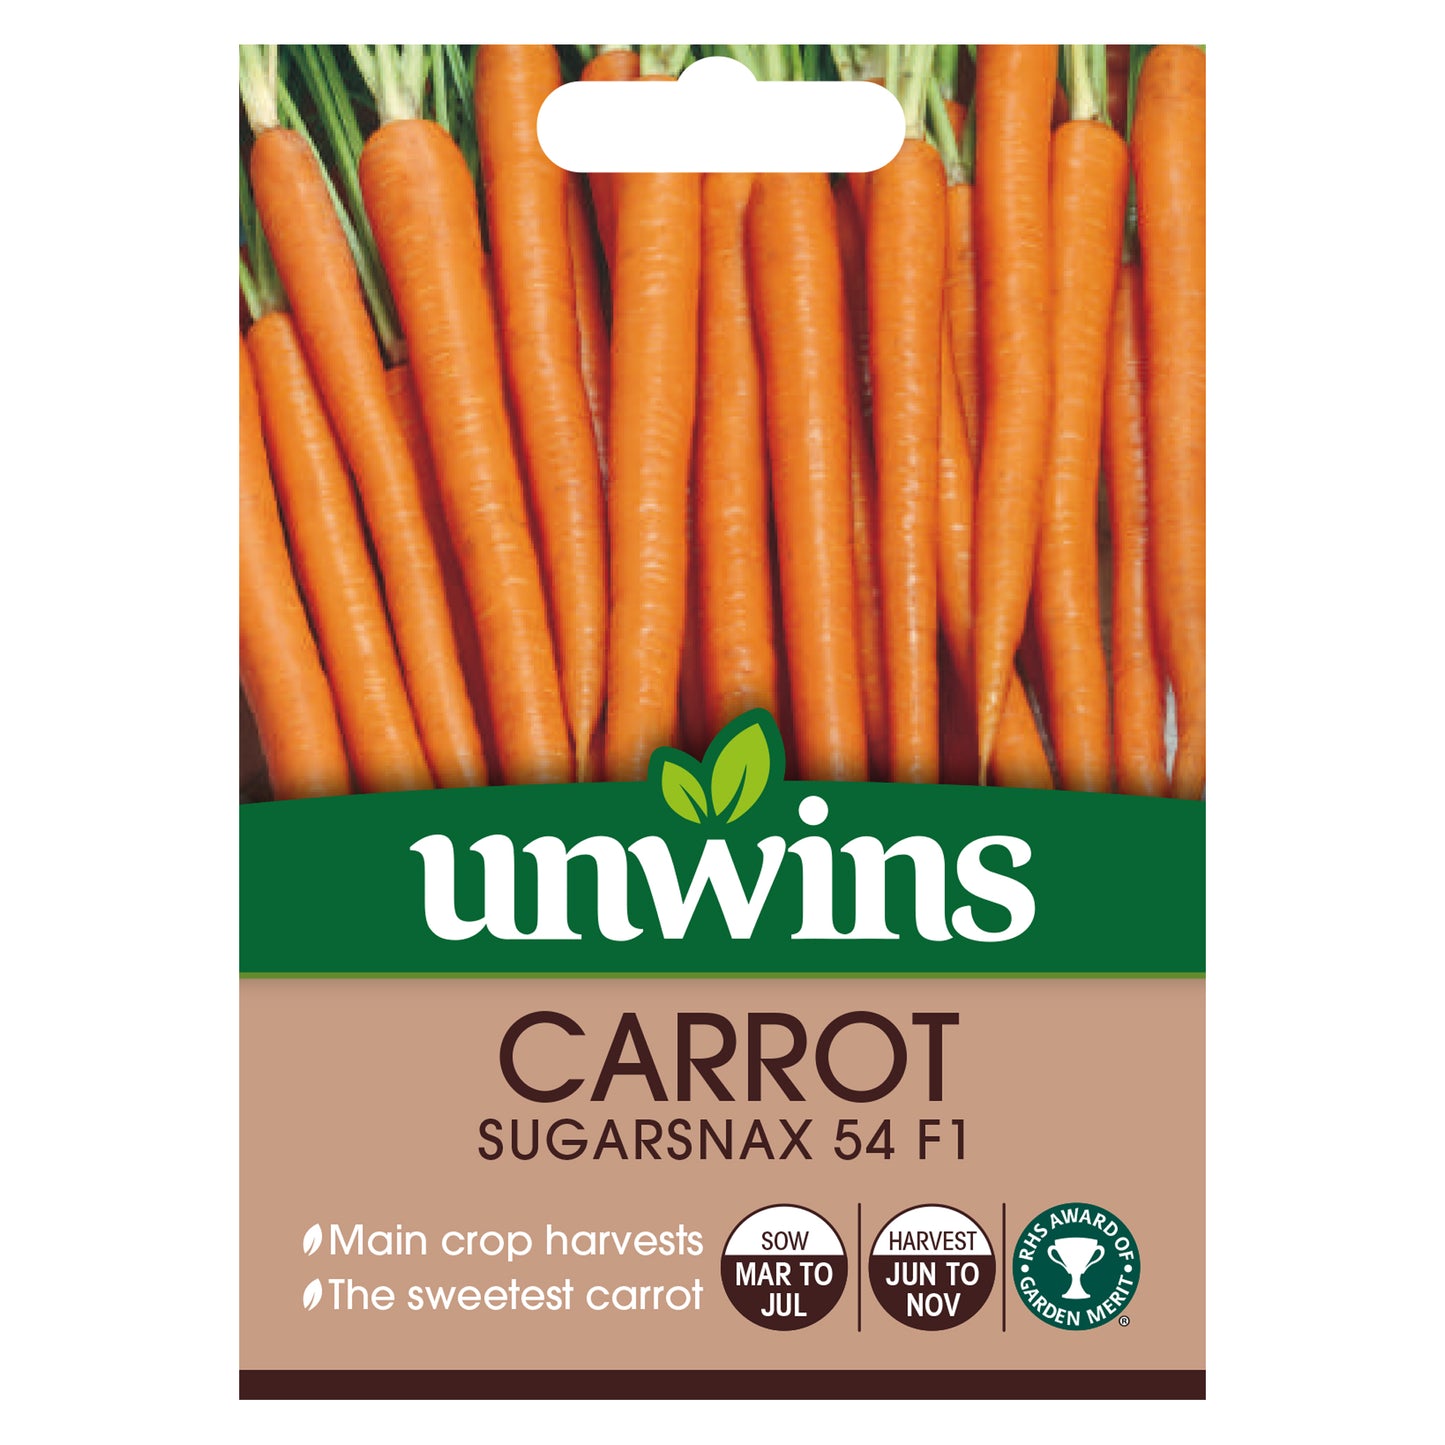 Unwins Carrot Sugarsnax 54 F1 Seeds front of pack